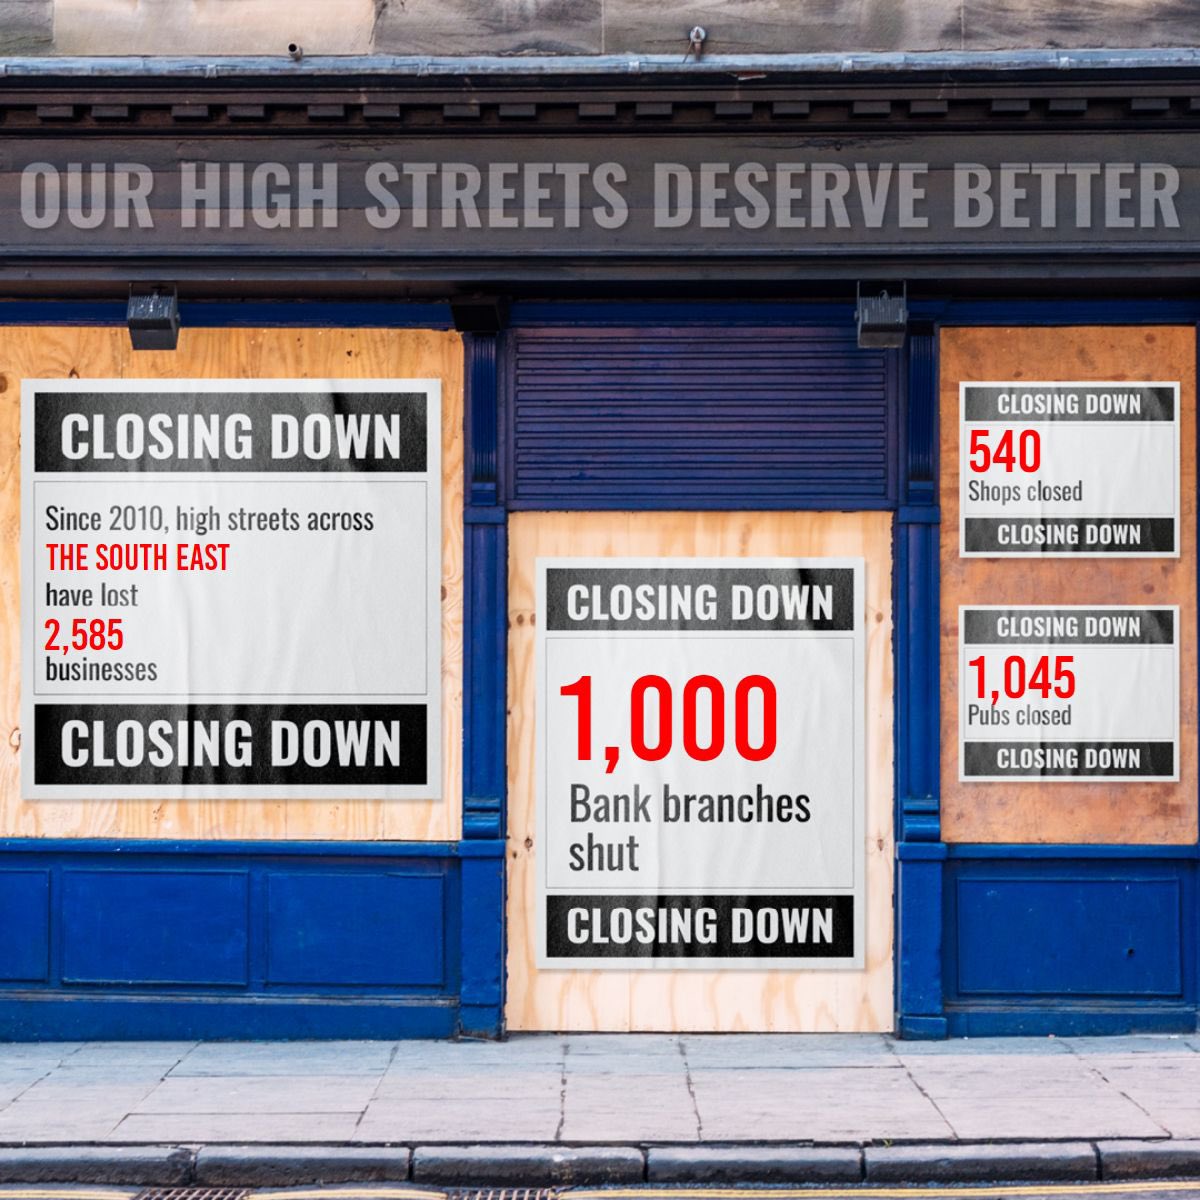 Under the Tories shuttered up shops have become the norm, Labour will breathe life back to the high street 👮‍♀️dedicated town centre police patrols 💷banking services back on the high street 🛍️Greater powers for councils to tackle empty premises ✅ reform business rates